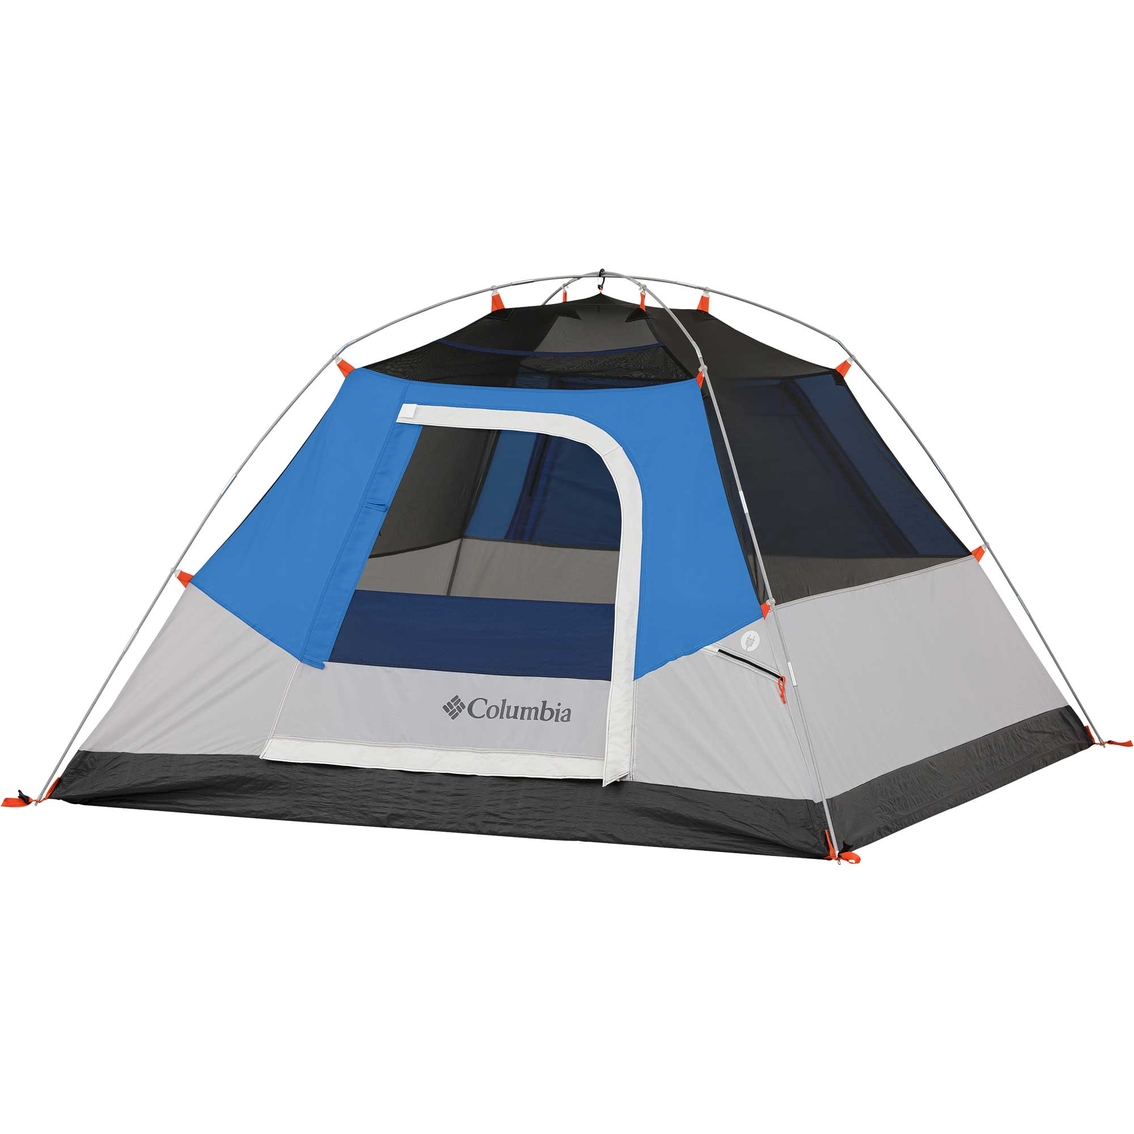 Columbia 3 Person FRP Tent - Image 2 of 10